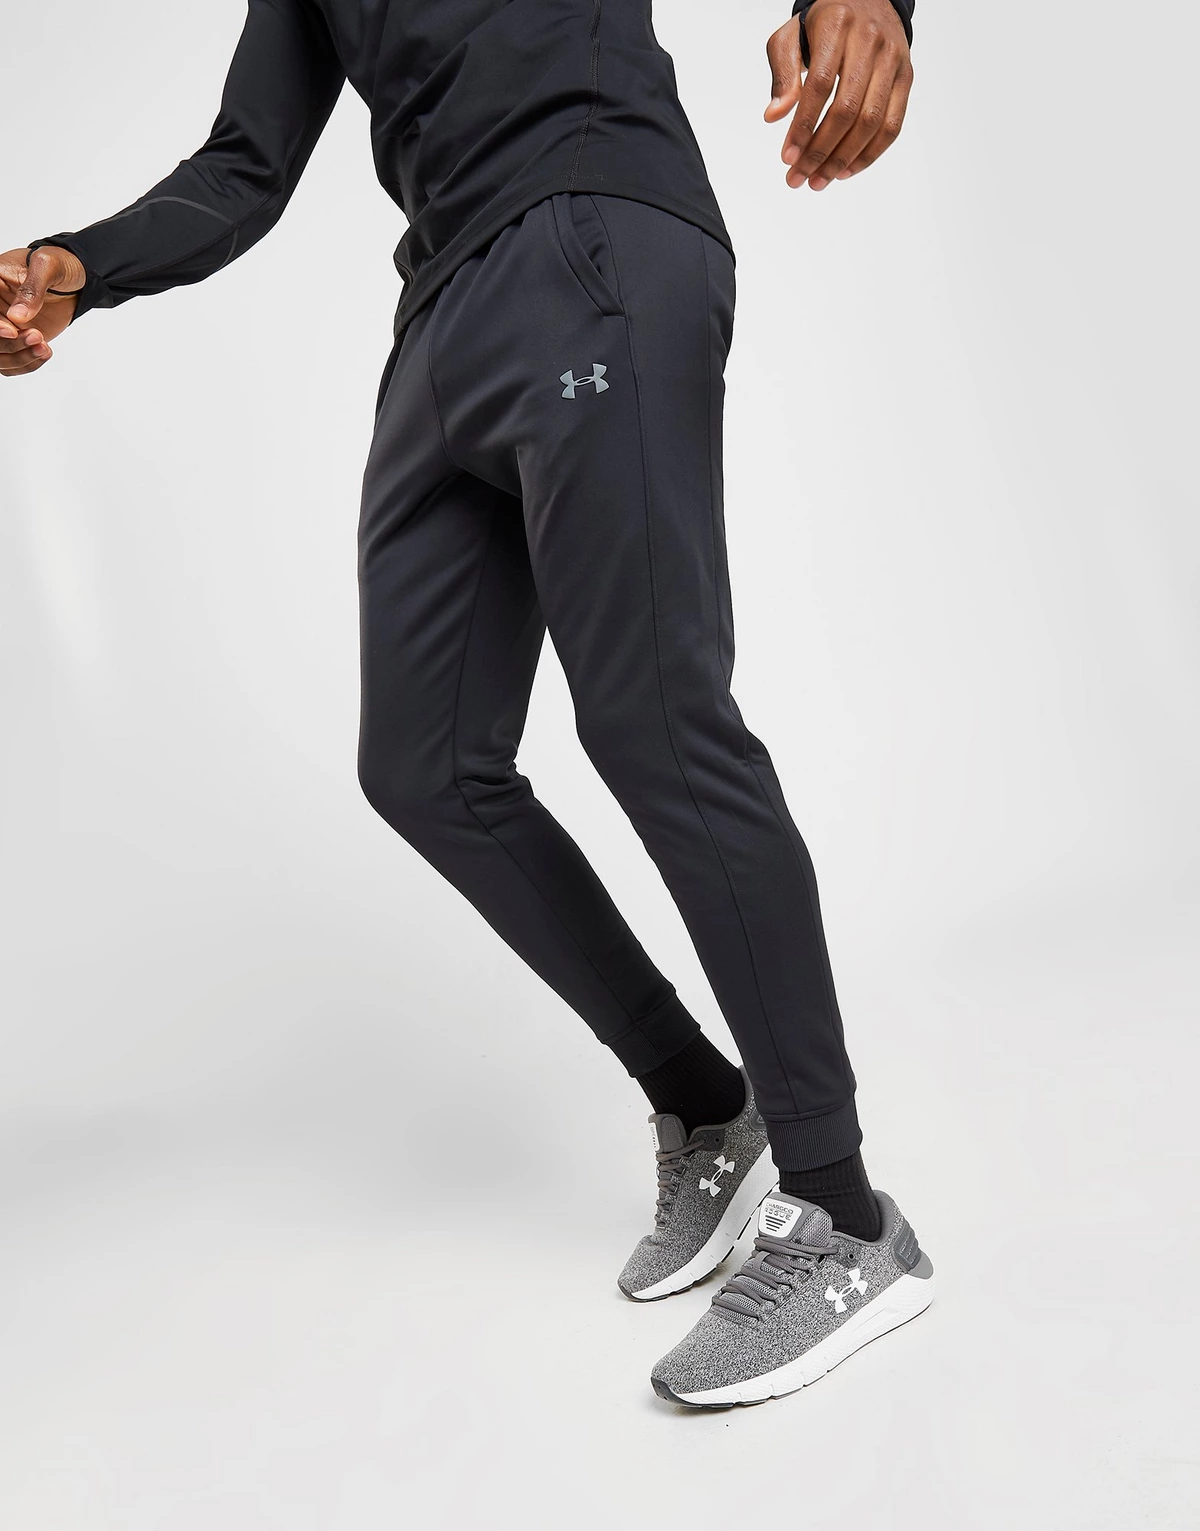 under armour clearance uk